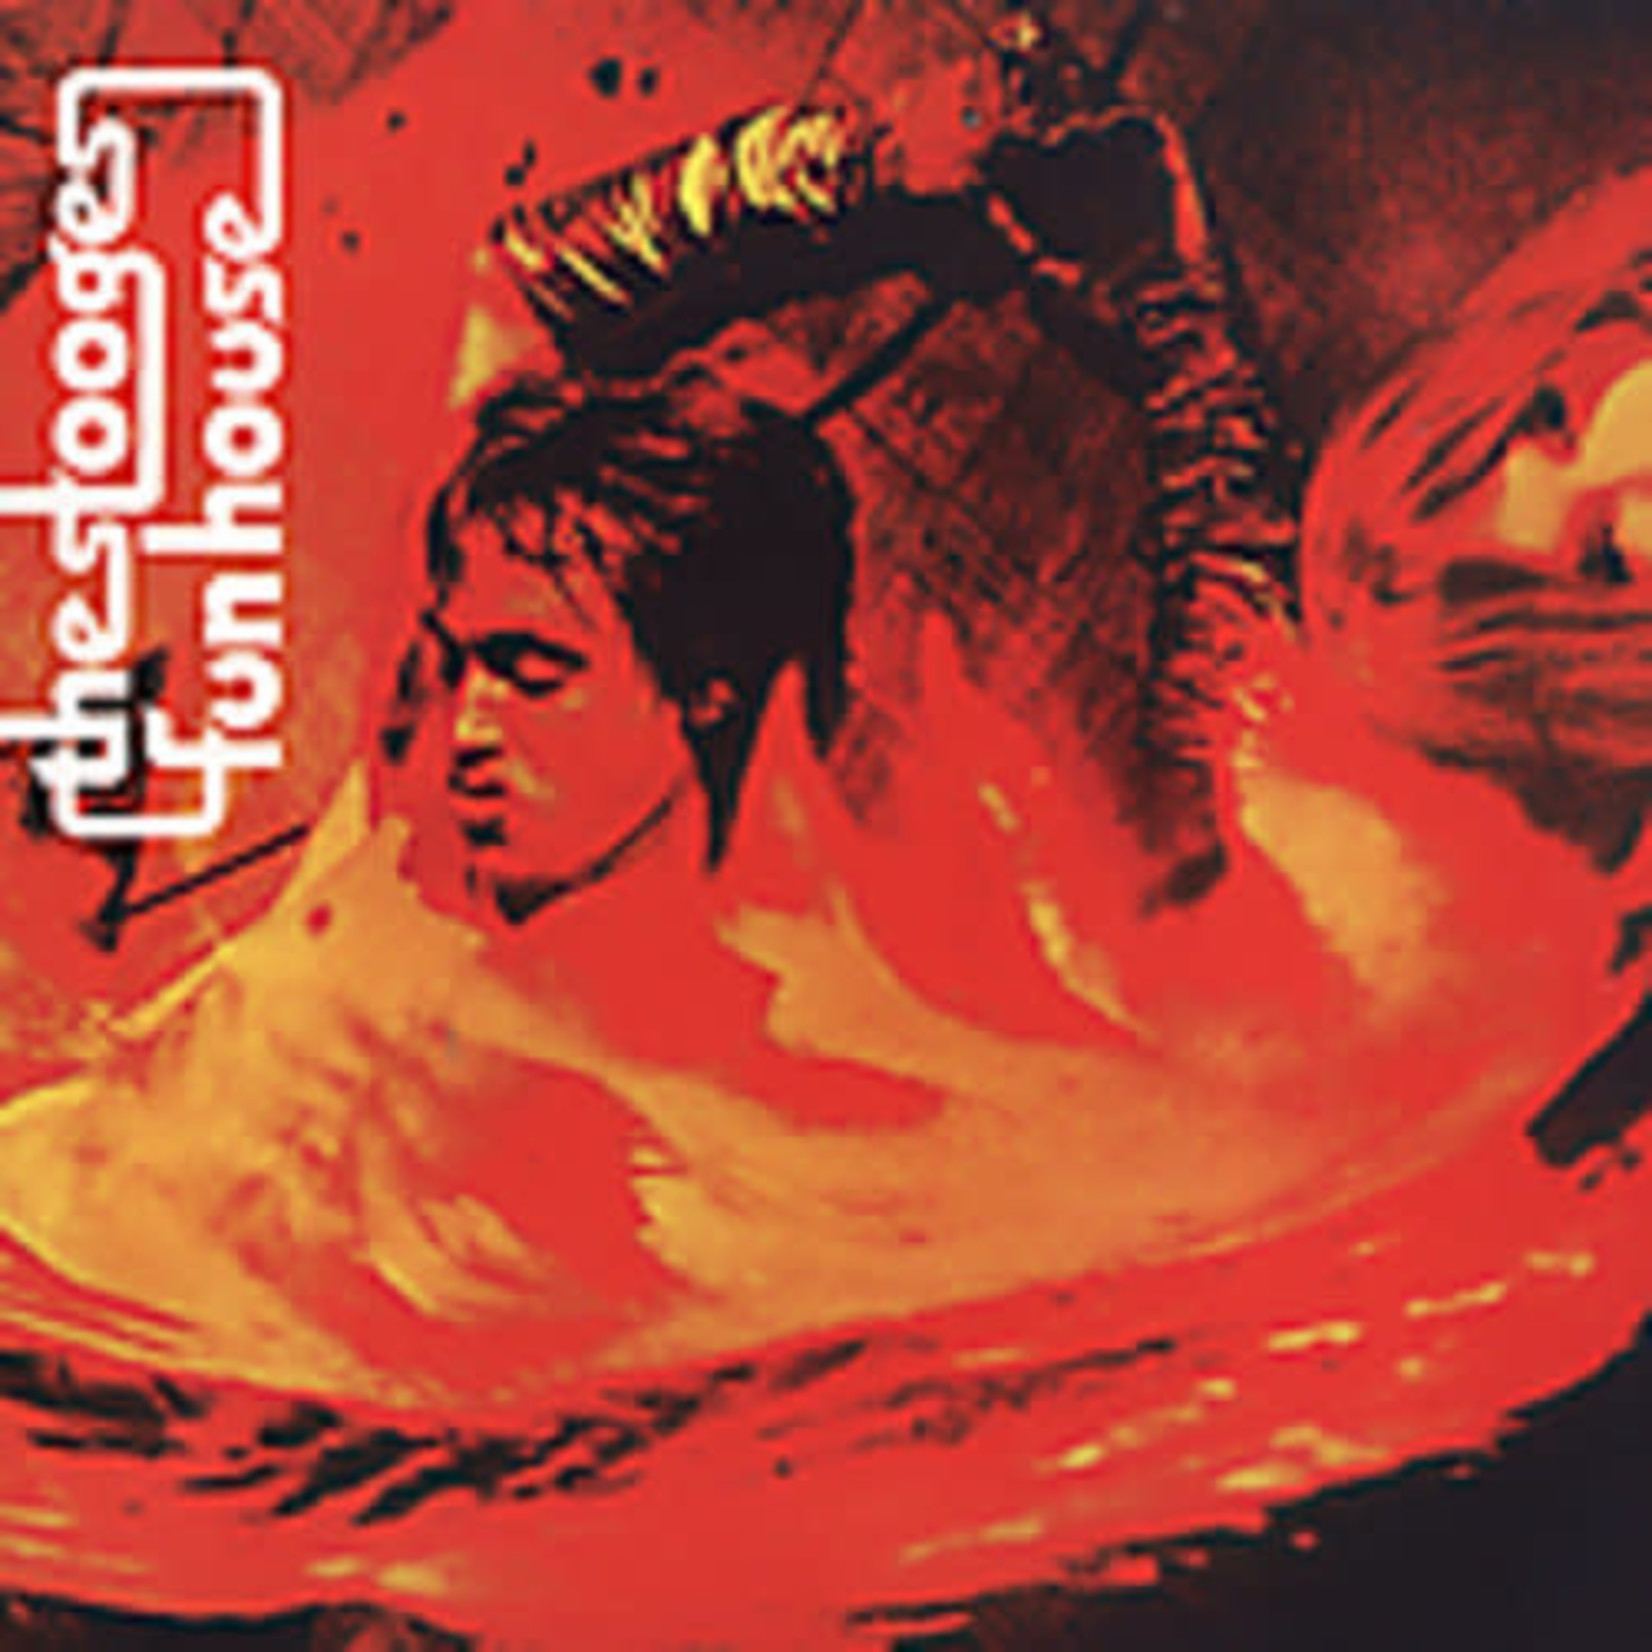 Stooges - Fun House [CD]